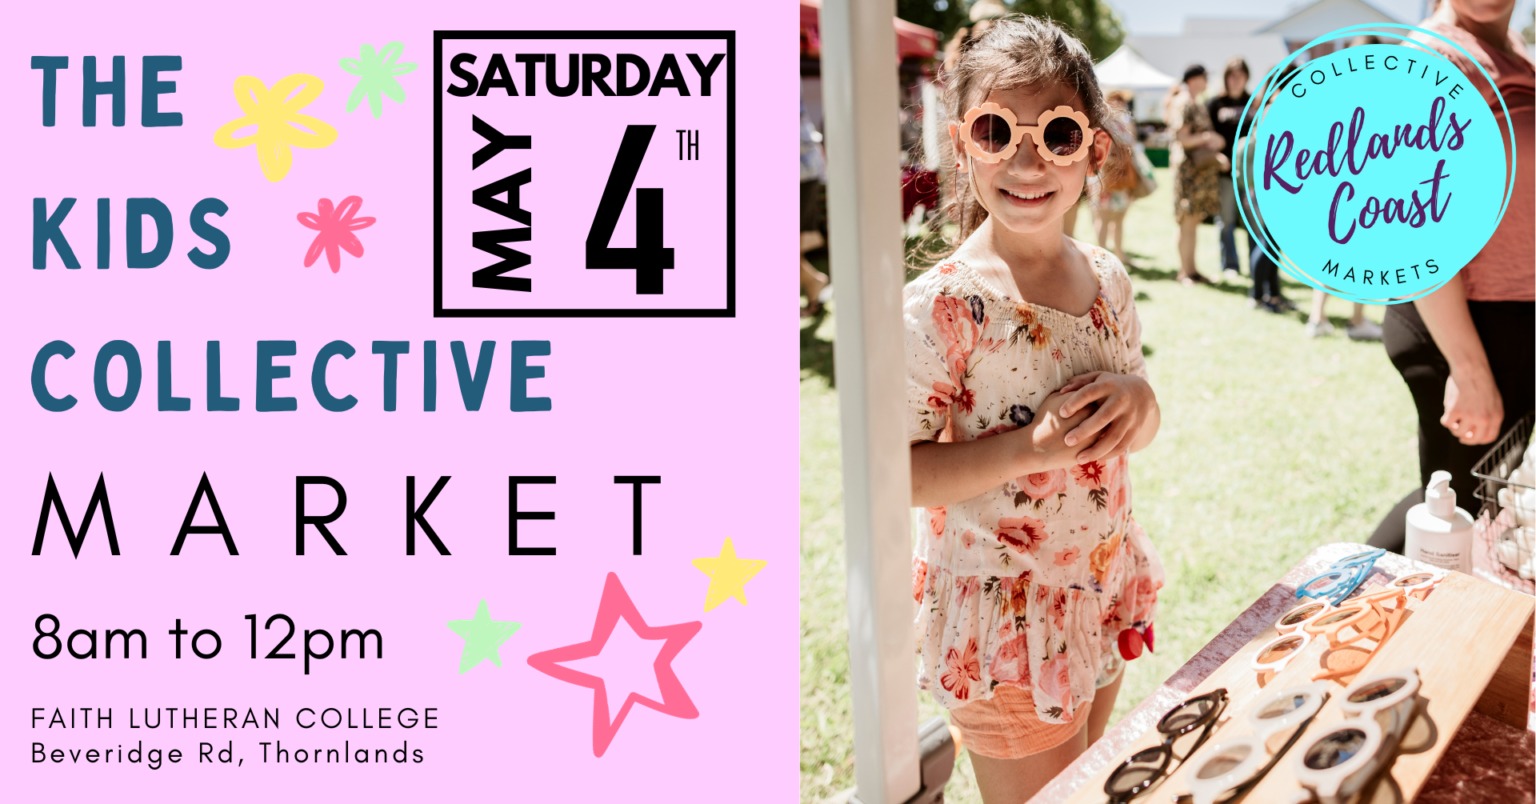 The Kids Collective Market